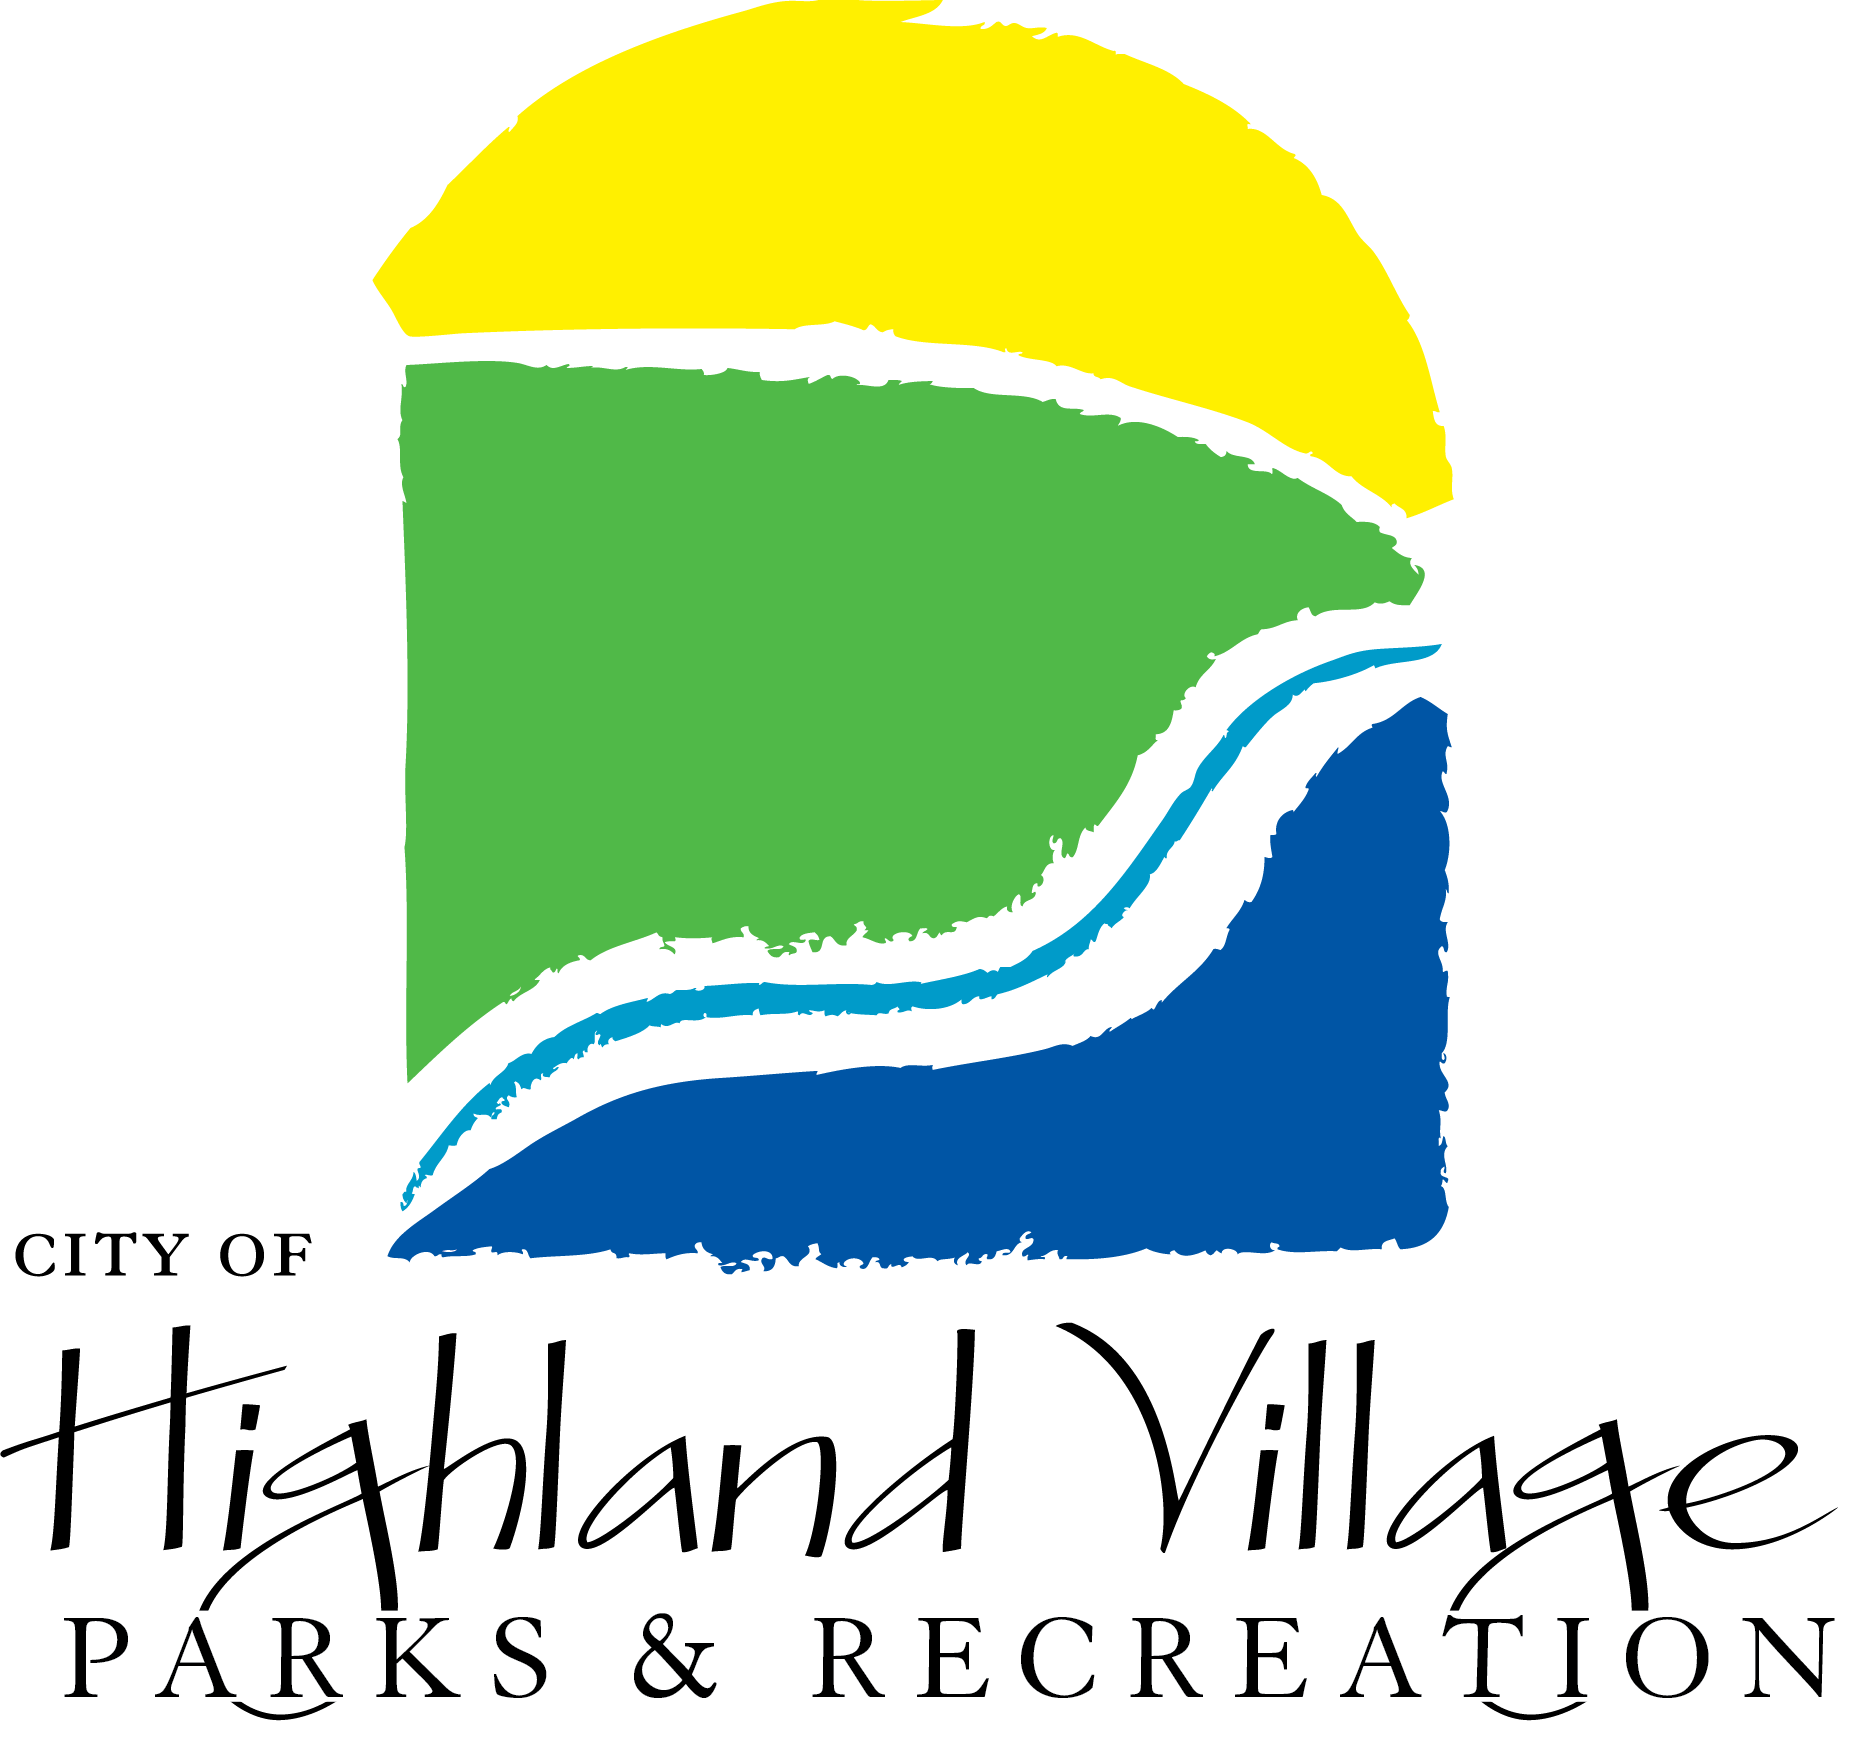 City of Highland Village Parks and Recreation